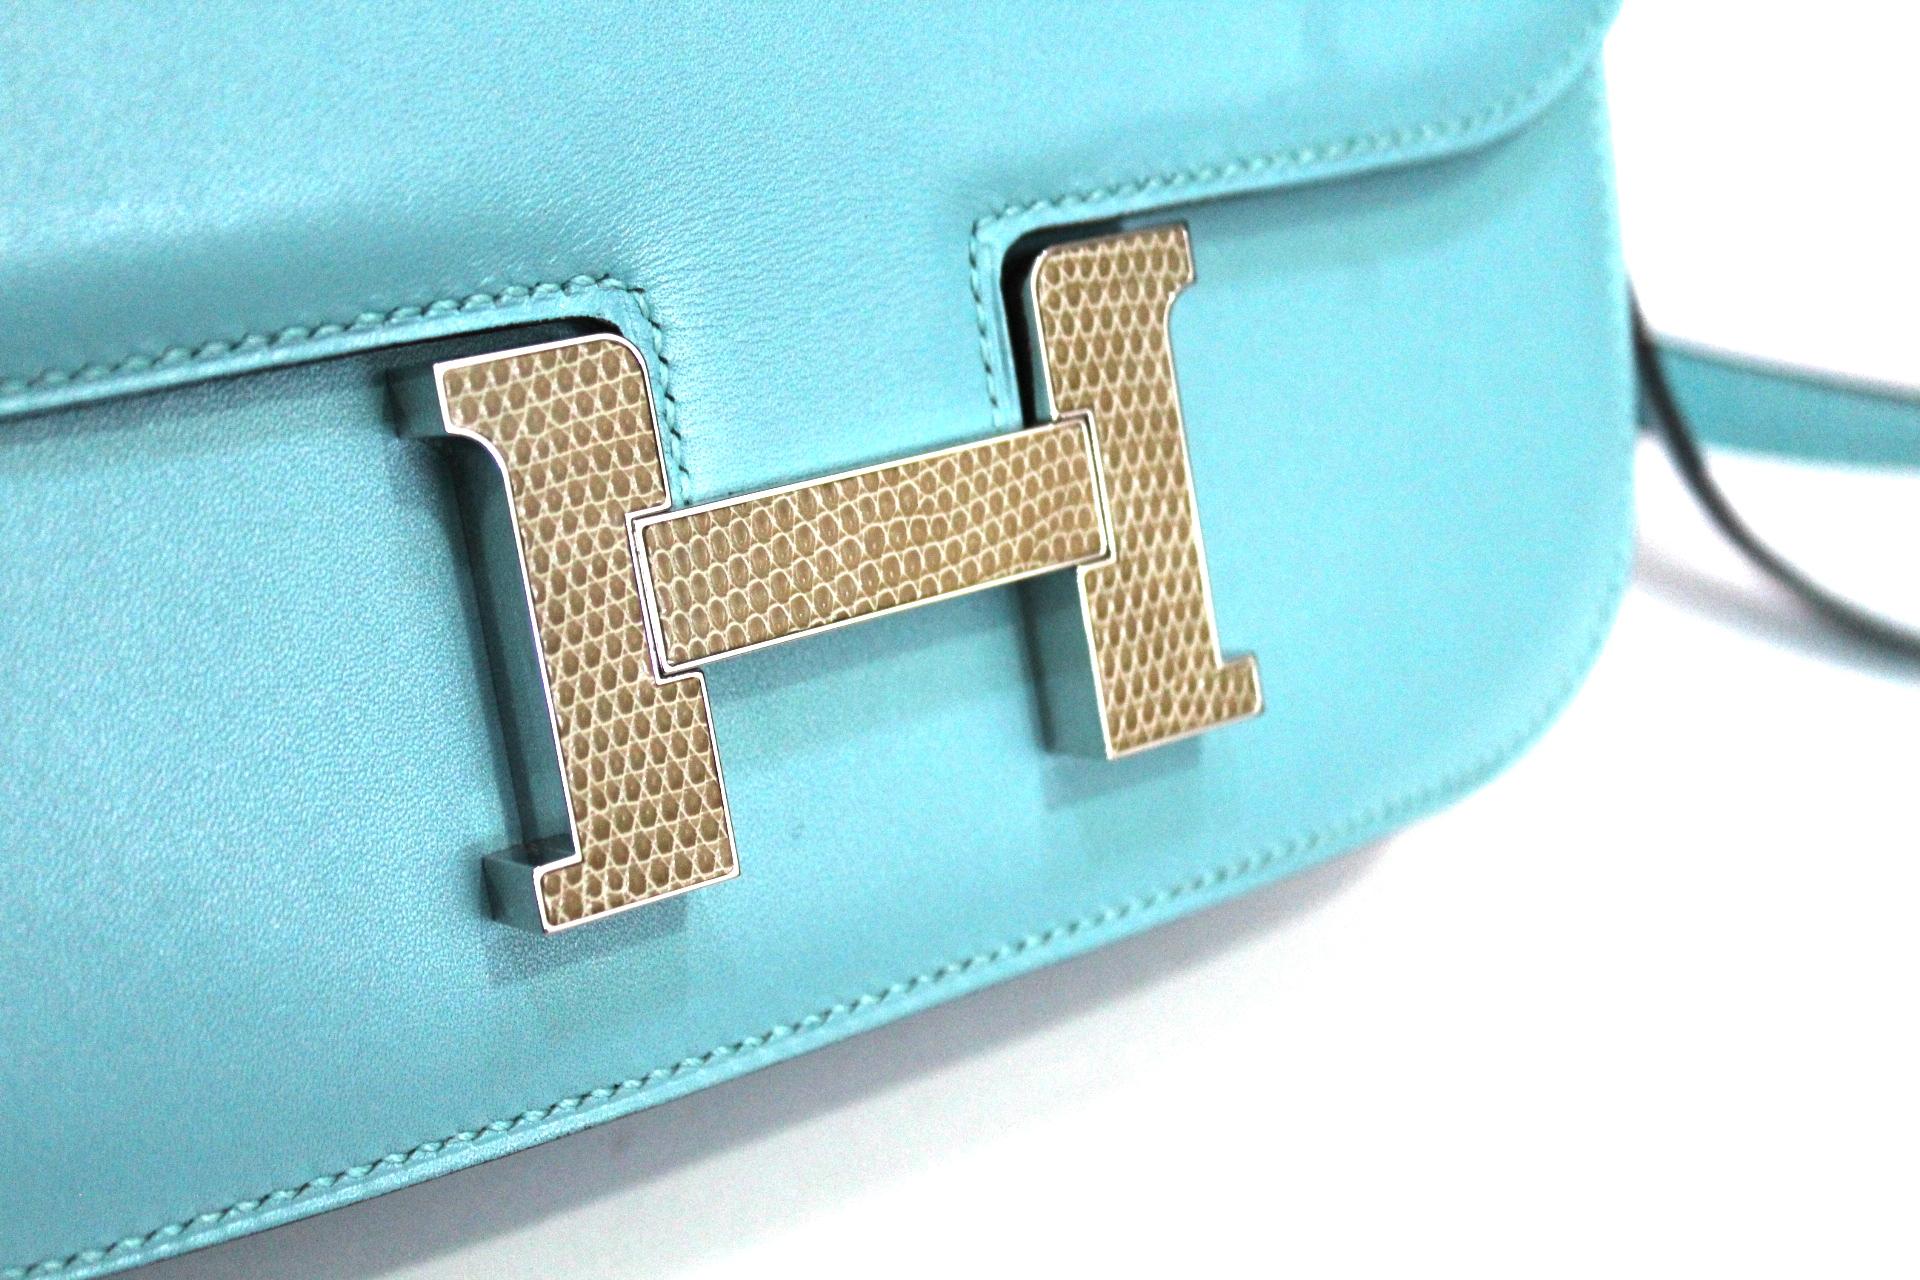 Pretty and original Hermes Constance small shoulder bag in Swift blue du nord leather, palladium inserts, convertible shoulder strap in blue leather to be worn on the shoulder or over the shoulder. The buckle is covered in python leather.